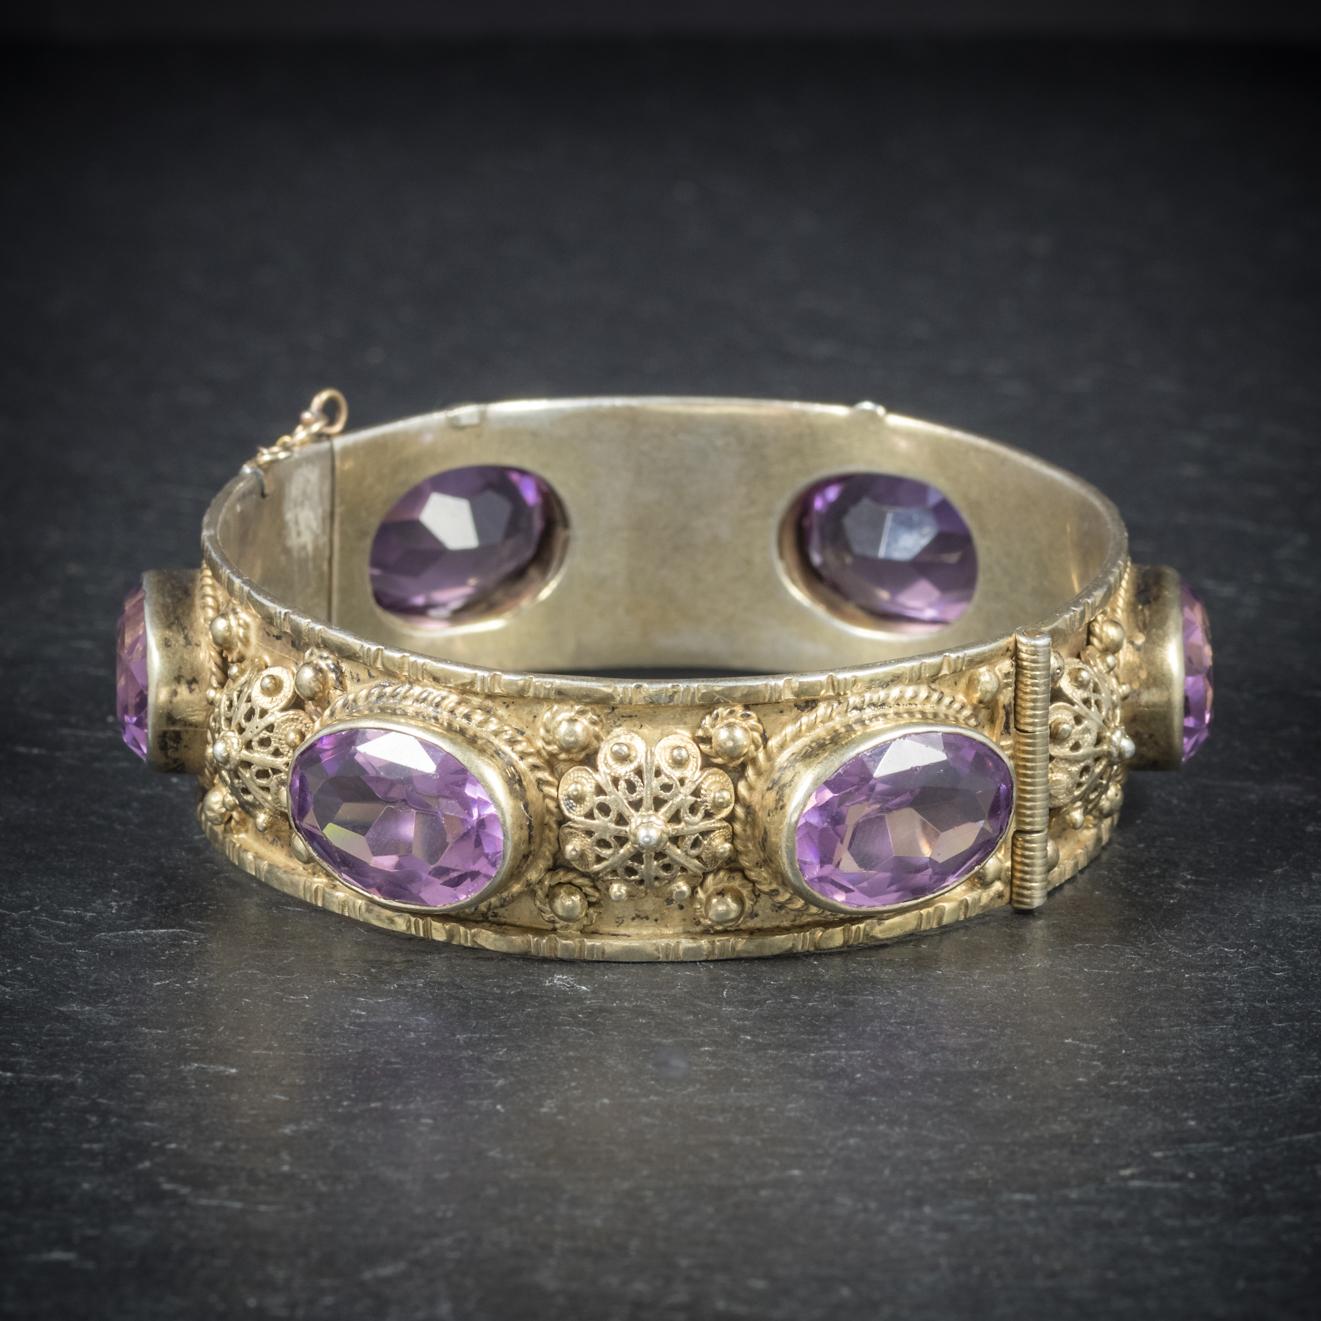 This grand antique Gold gilt Amethyst bangle is Victorian, Circa 1900

The unique piece is set with six fabulous Amethysts which add up to an impressive 48cts

Set in a fabulous Gold gilt setting with beautiful ornate detailing and fretwork 

Fitted